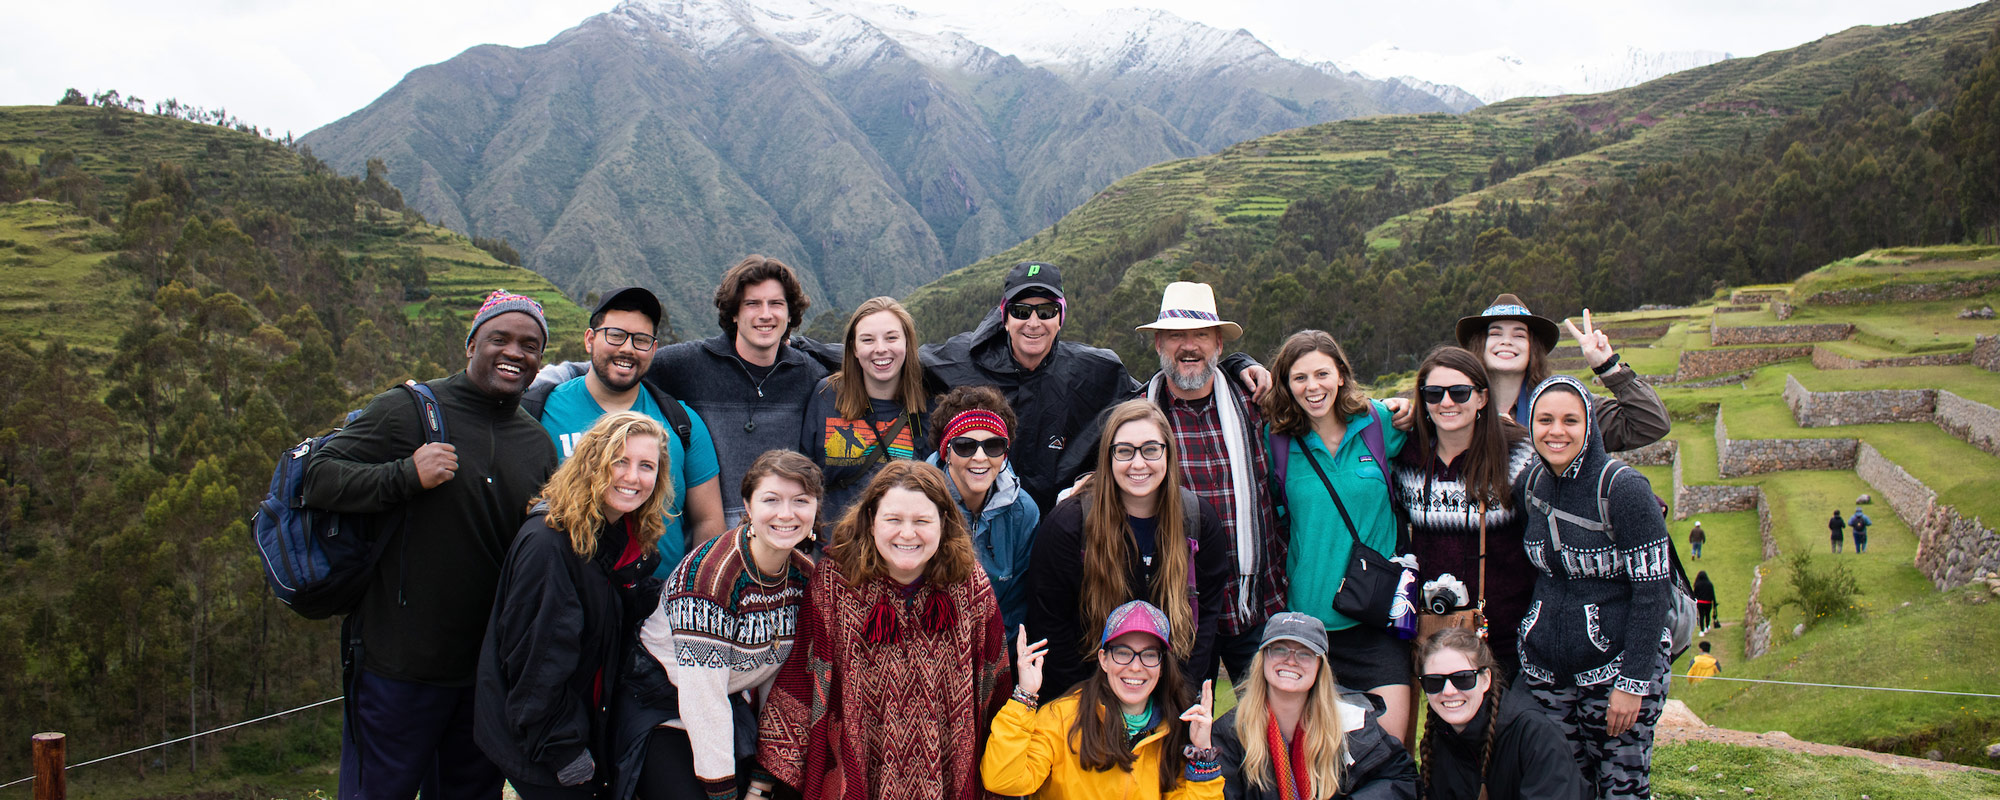 Student group photo at the famous lookout of Machu Picchu.